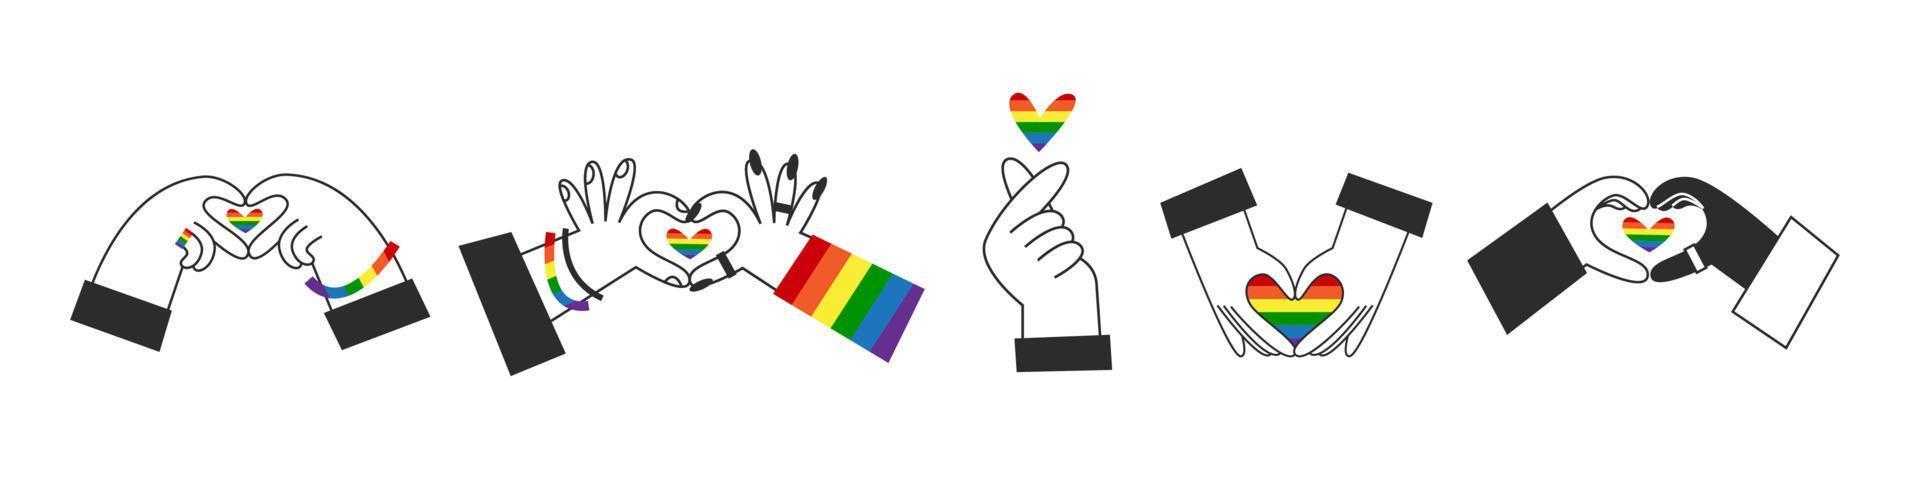 Hands make rainbow heart shape. Different ethnicities with a gay lgbt flag symbol. Happy pride, Valentines day, diversity and inclusion concept. Vector flat illustration set.